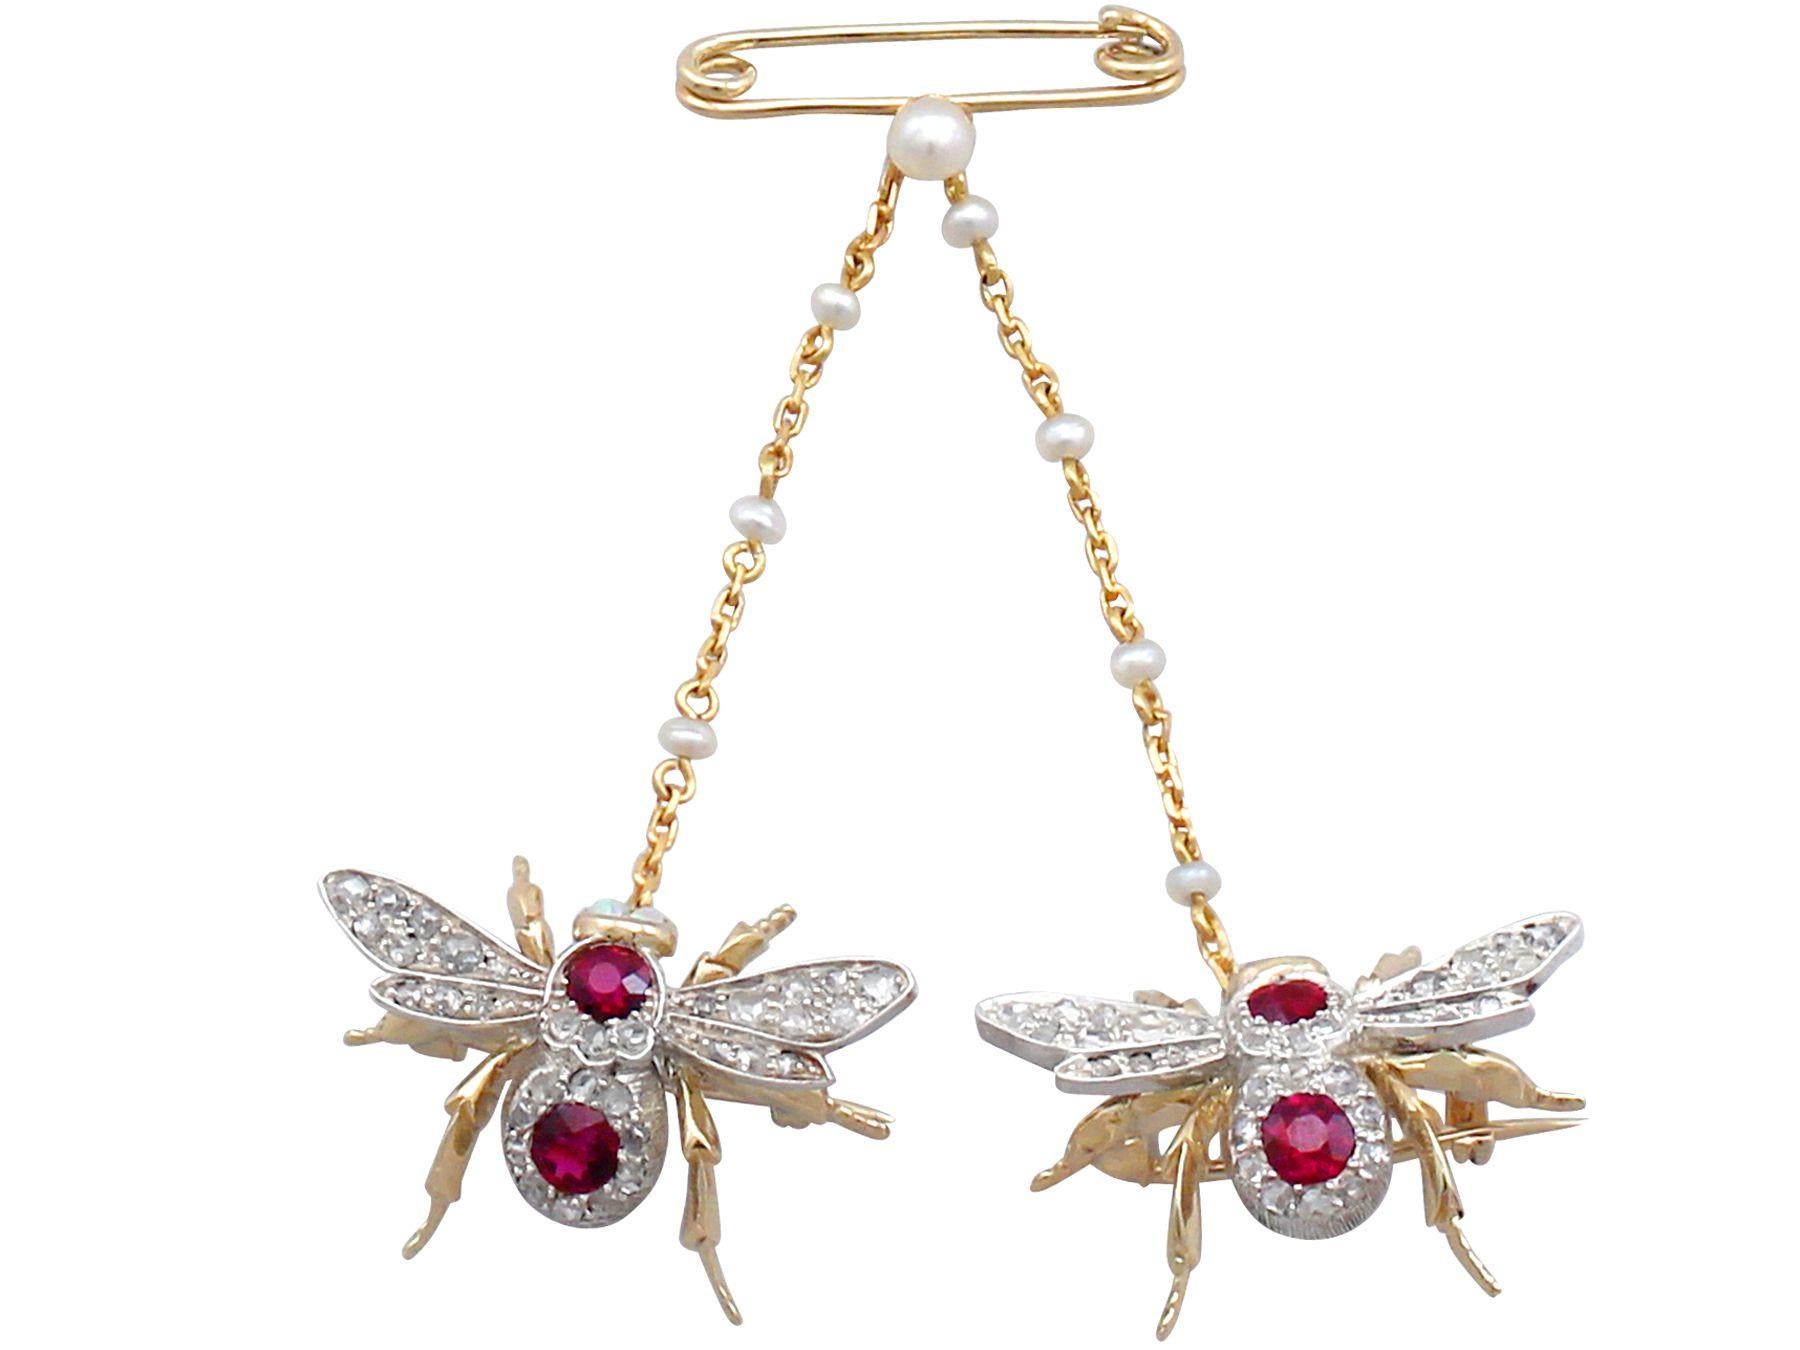 Round Cut Victorian 1.10 Carat Ruby and Opal Diamond and Gold Bee Brooch